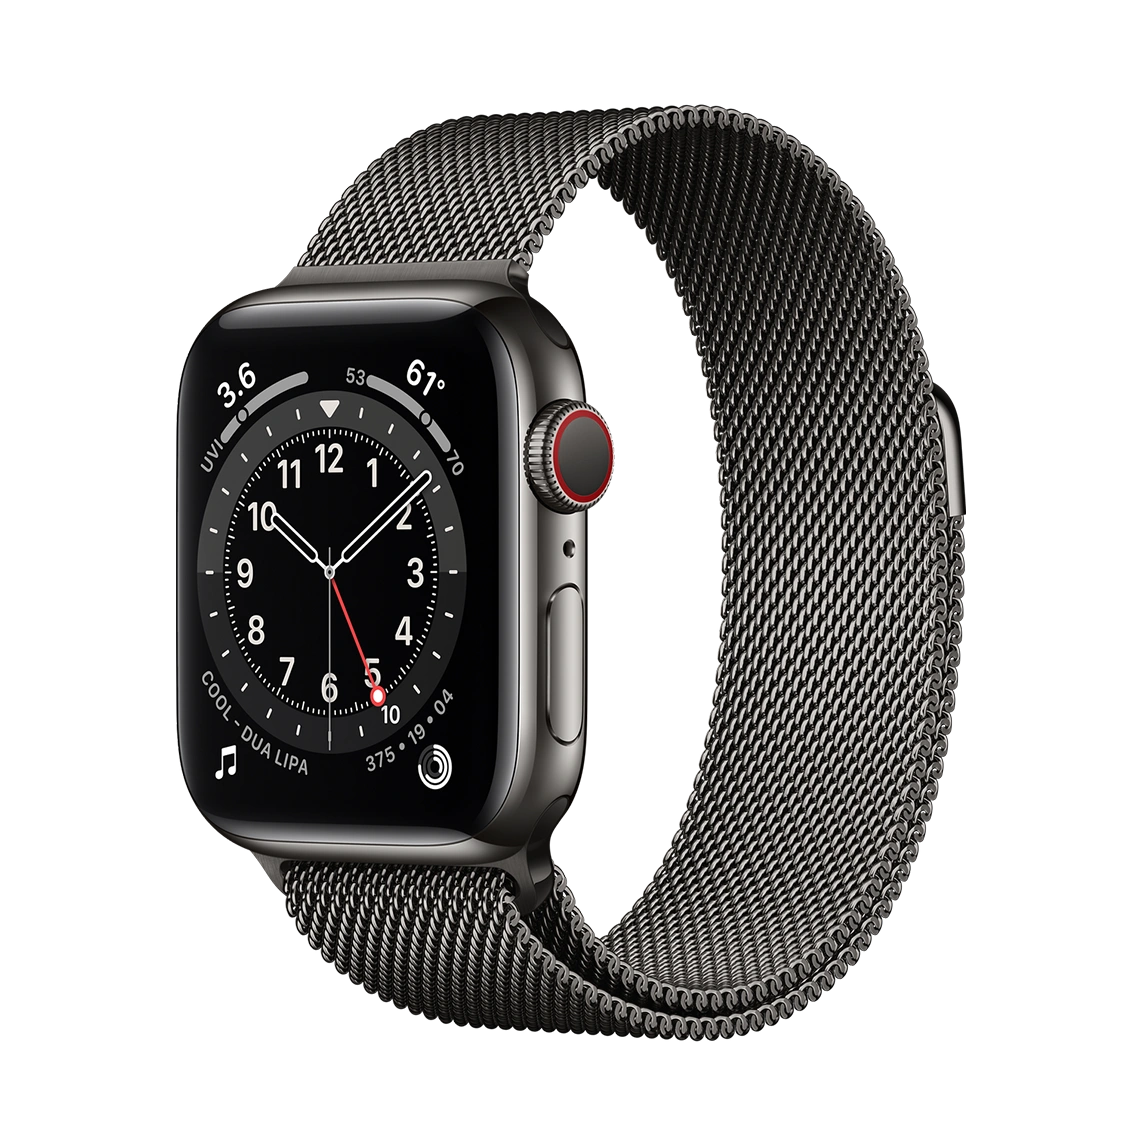 Apple Watch Series 6 Graphite Stainless Steel Case with Milanese Loop